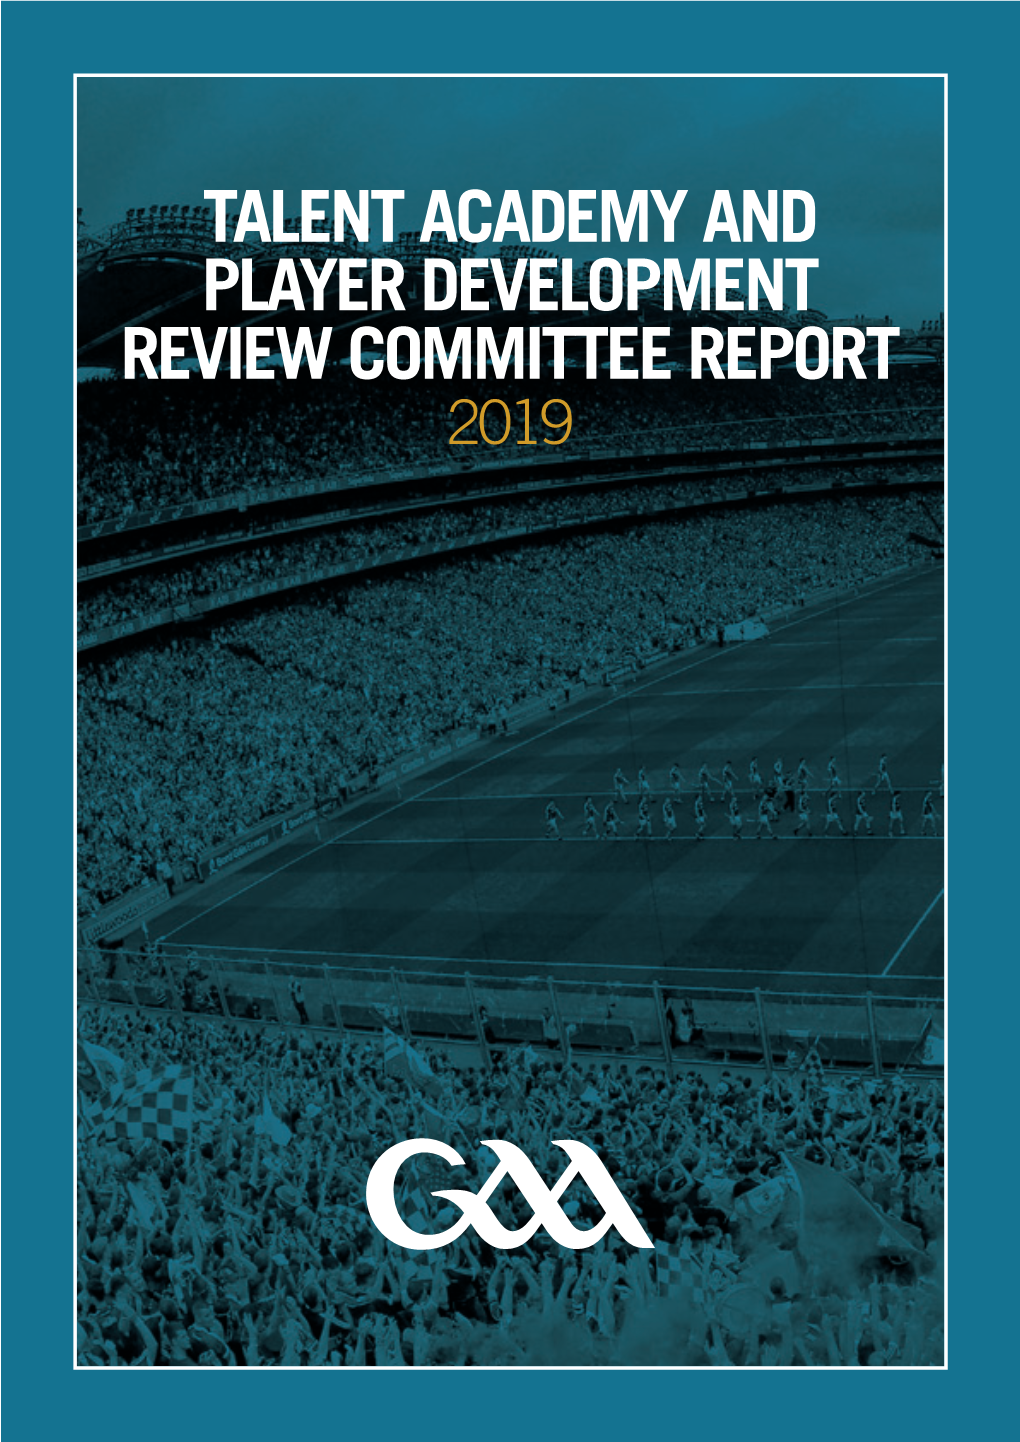 Talent Academy and Player Development Review Committee Report 2019